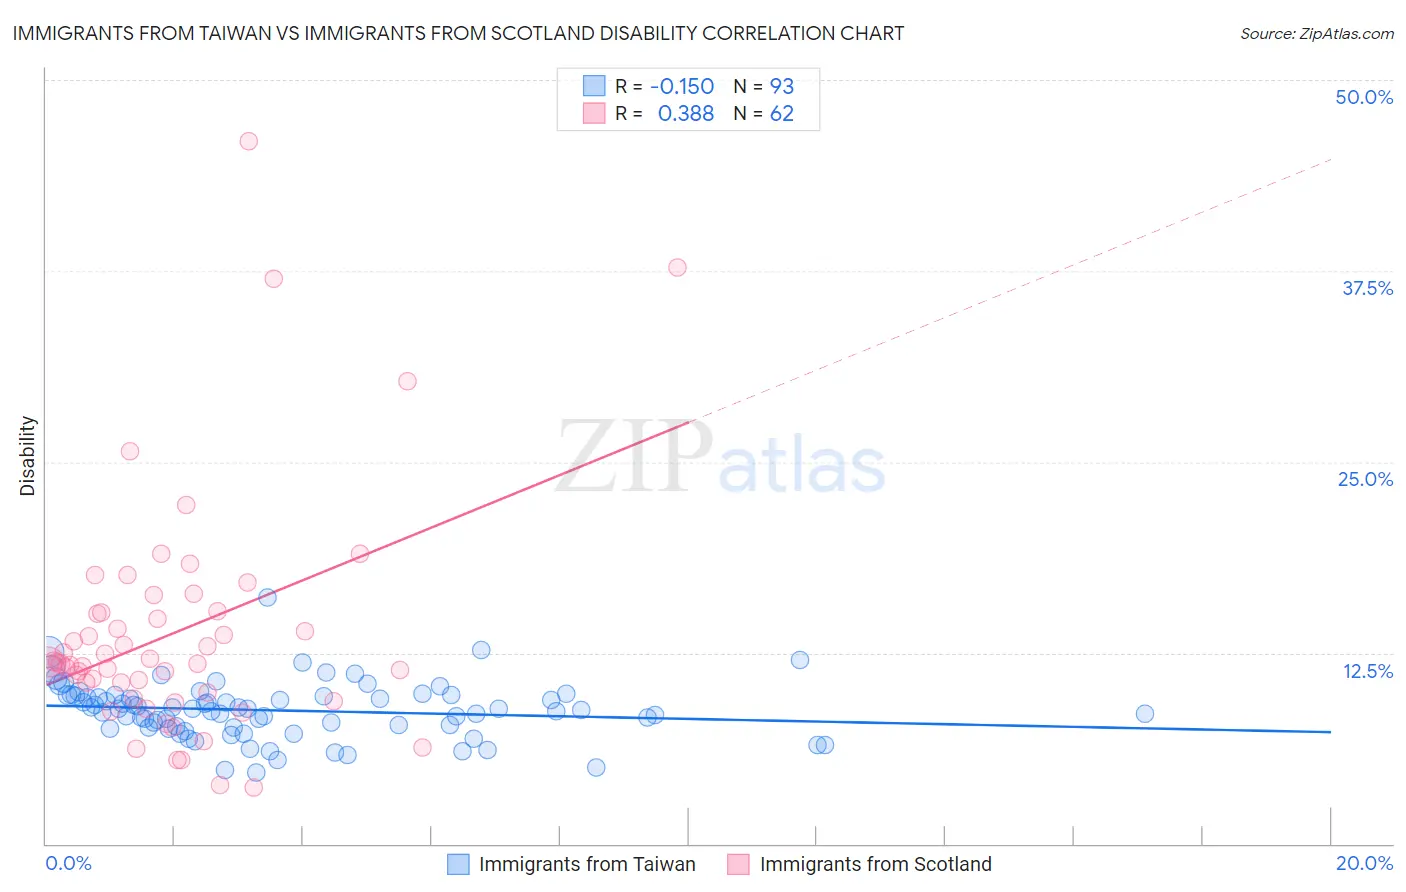 Immigrants from Taiwan vs Immigrants from Scotland Disability